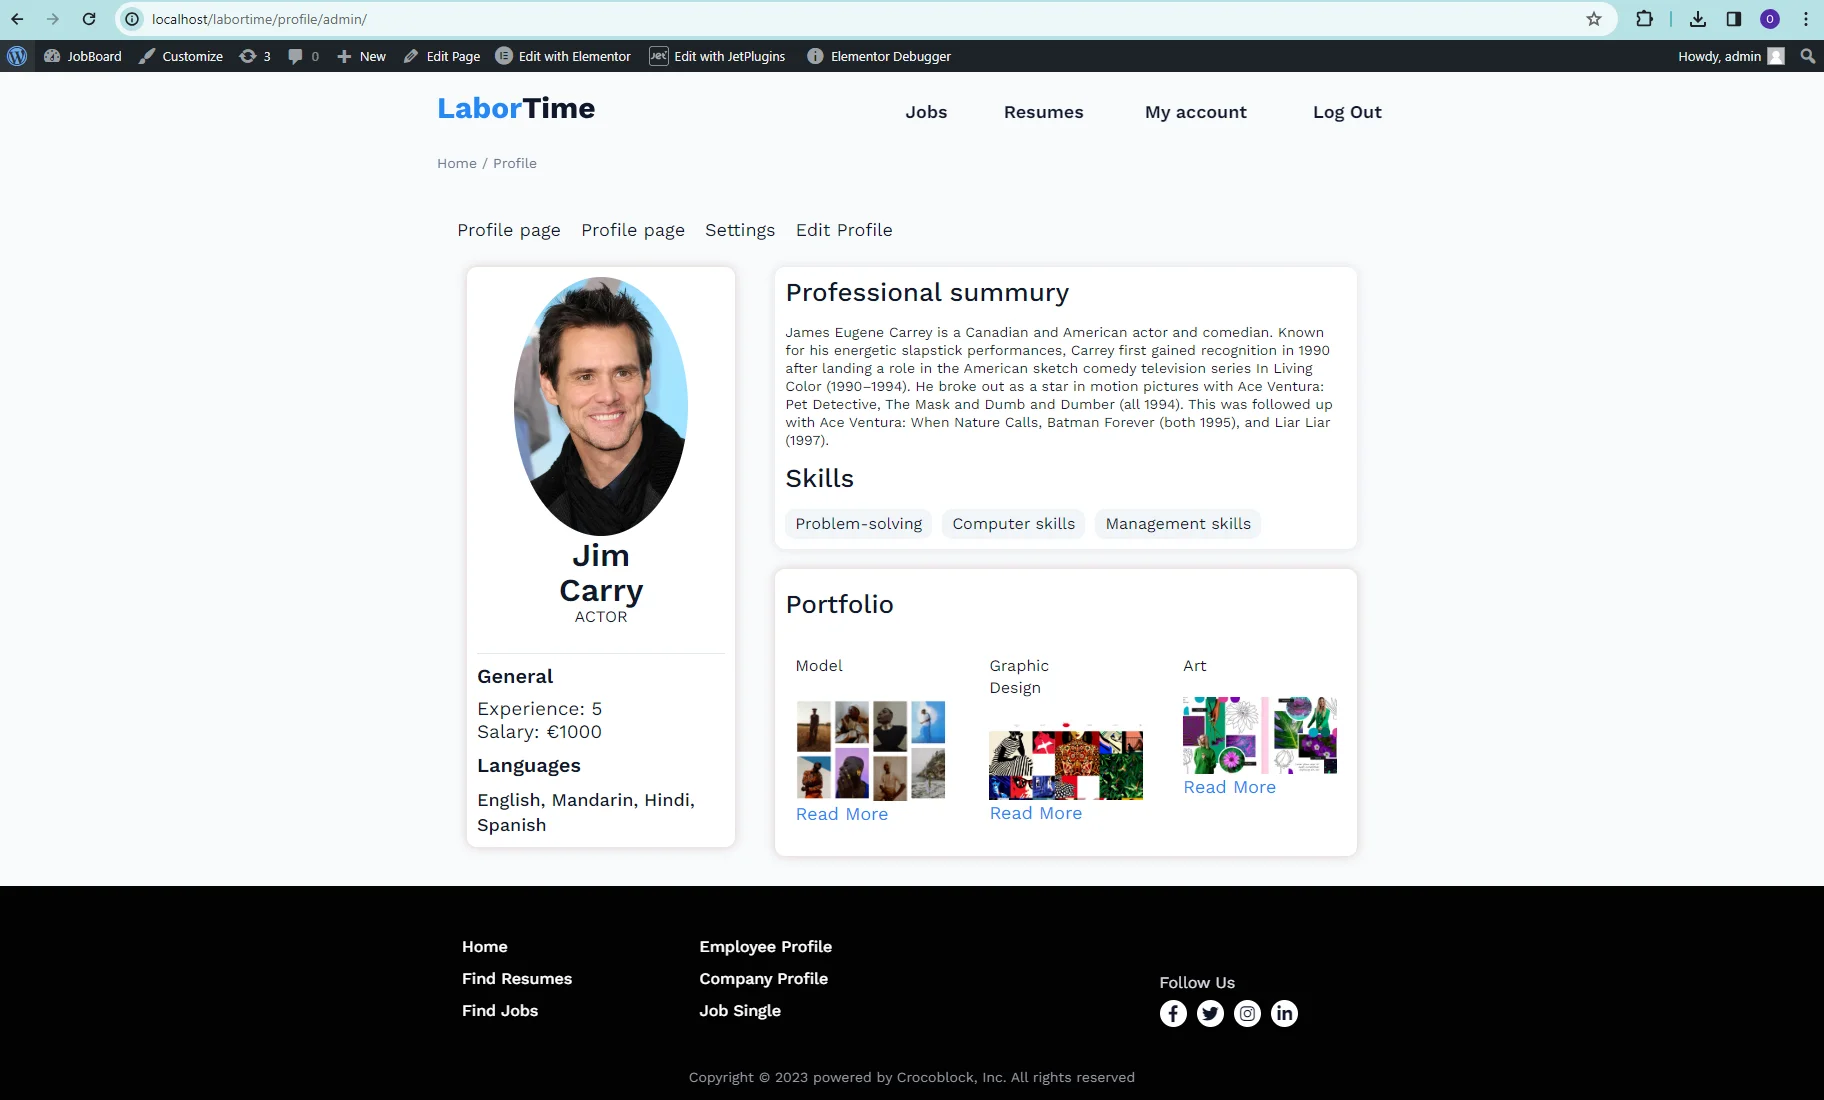 single user profile page on the front end